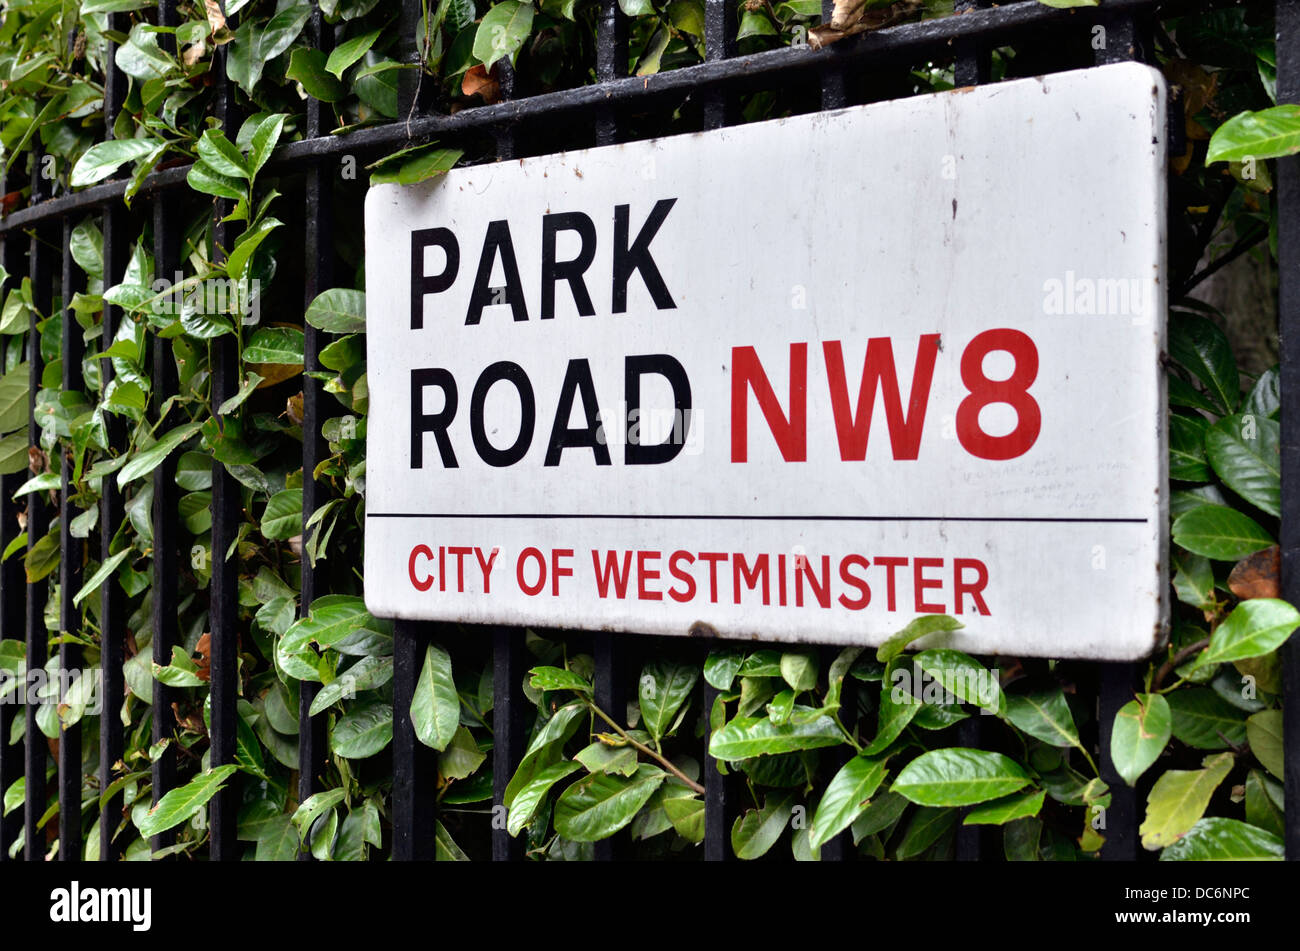 Park Road NW8 City of Westminster street sign, London, UK Stock Photo